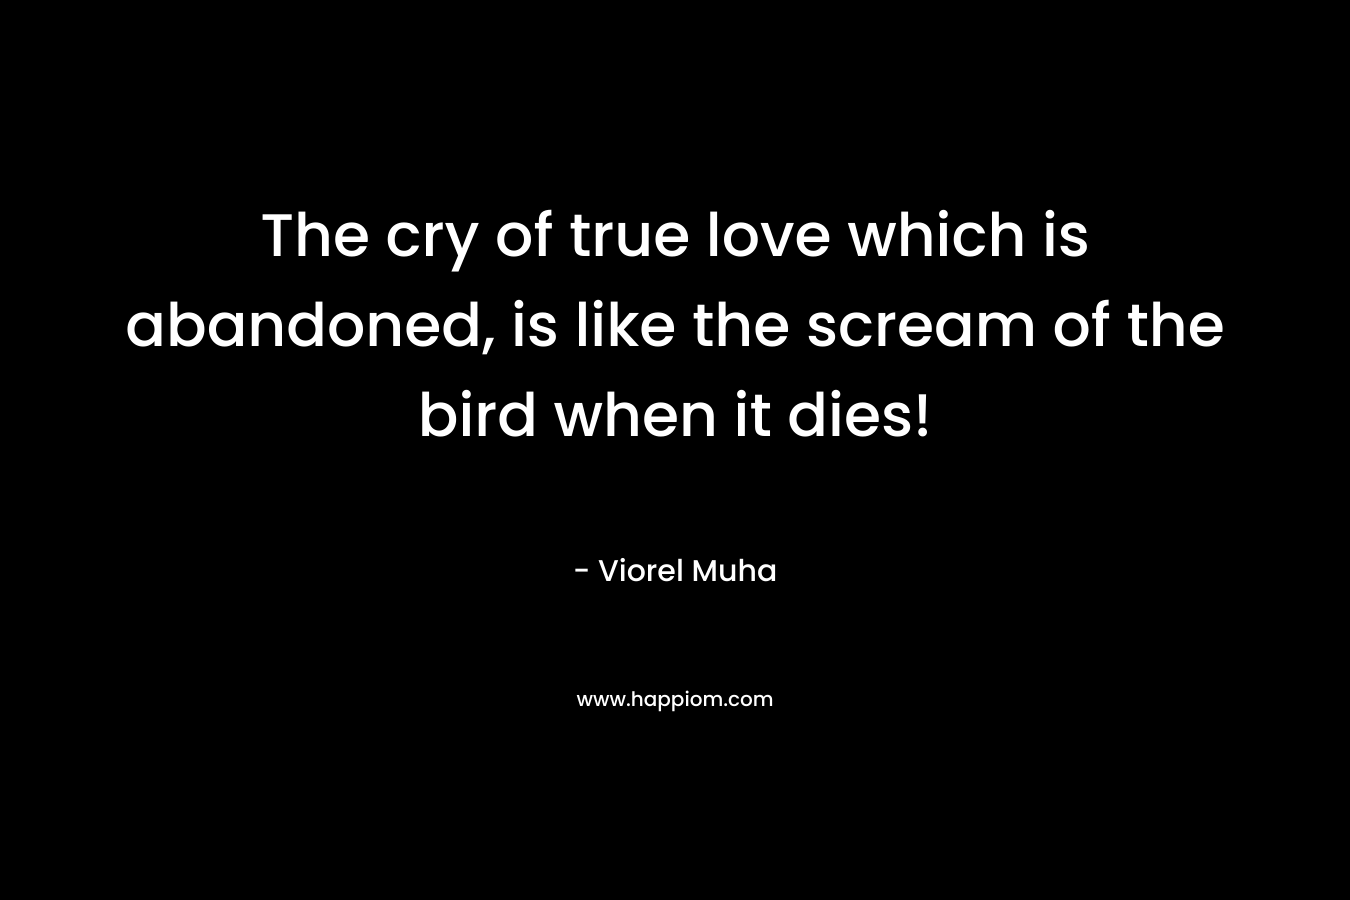 The cry of true love which is abandoned, is like the scream of the bird when it dies!